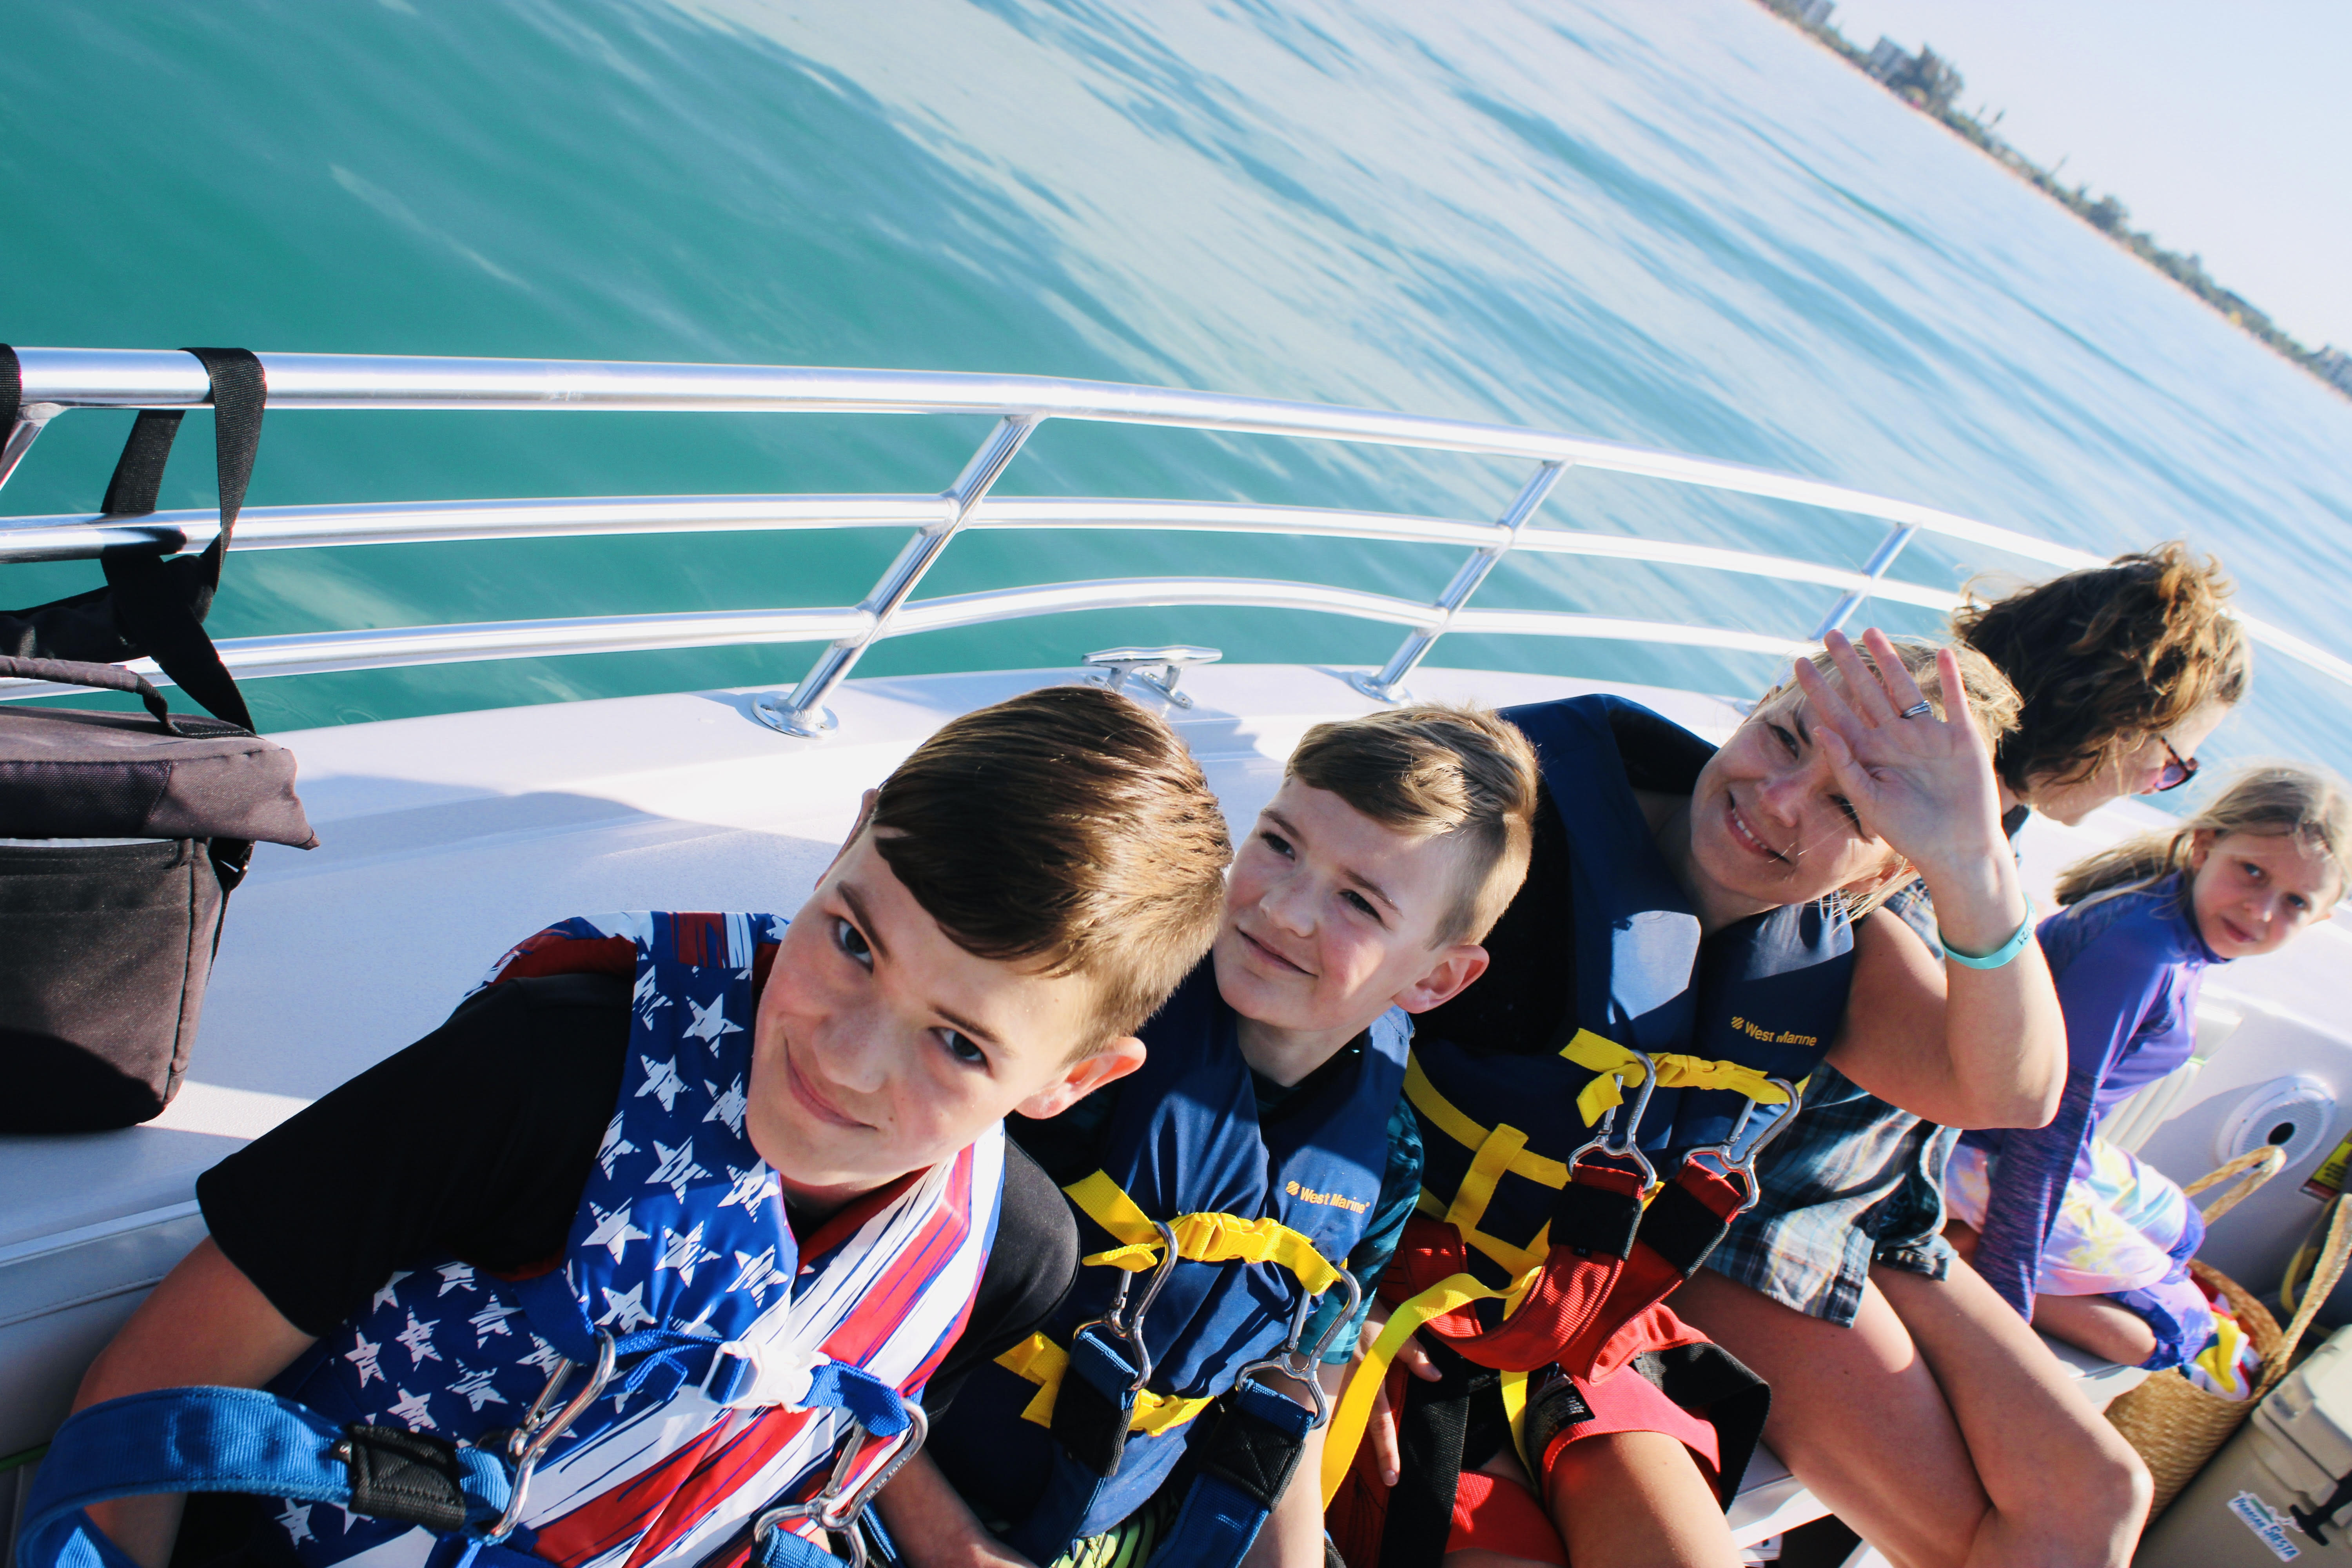 Learn all about Siesta Key parasailing (and find out, "Is Parasailing Scary?") from Top U.S. Family Travel Blog, Travel With A Plan.